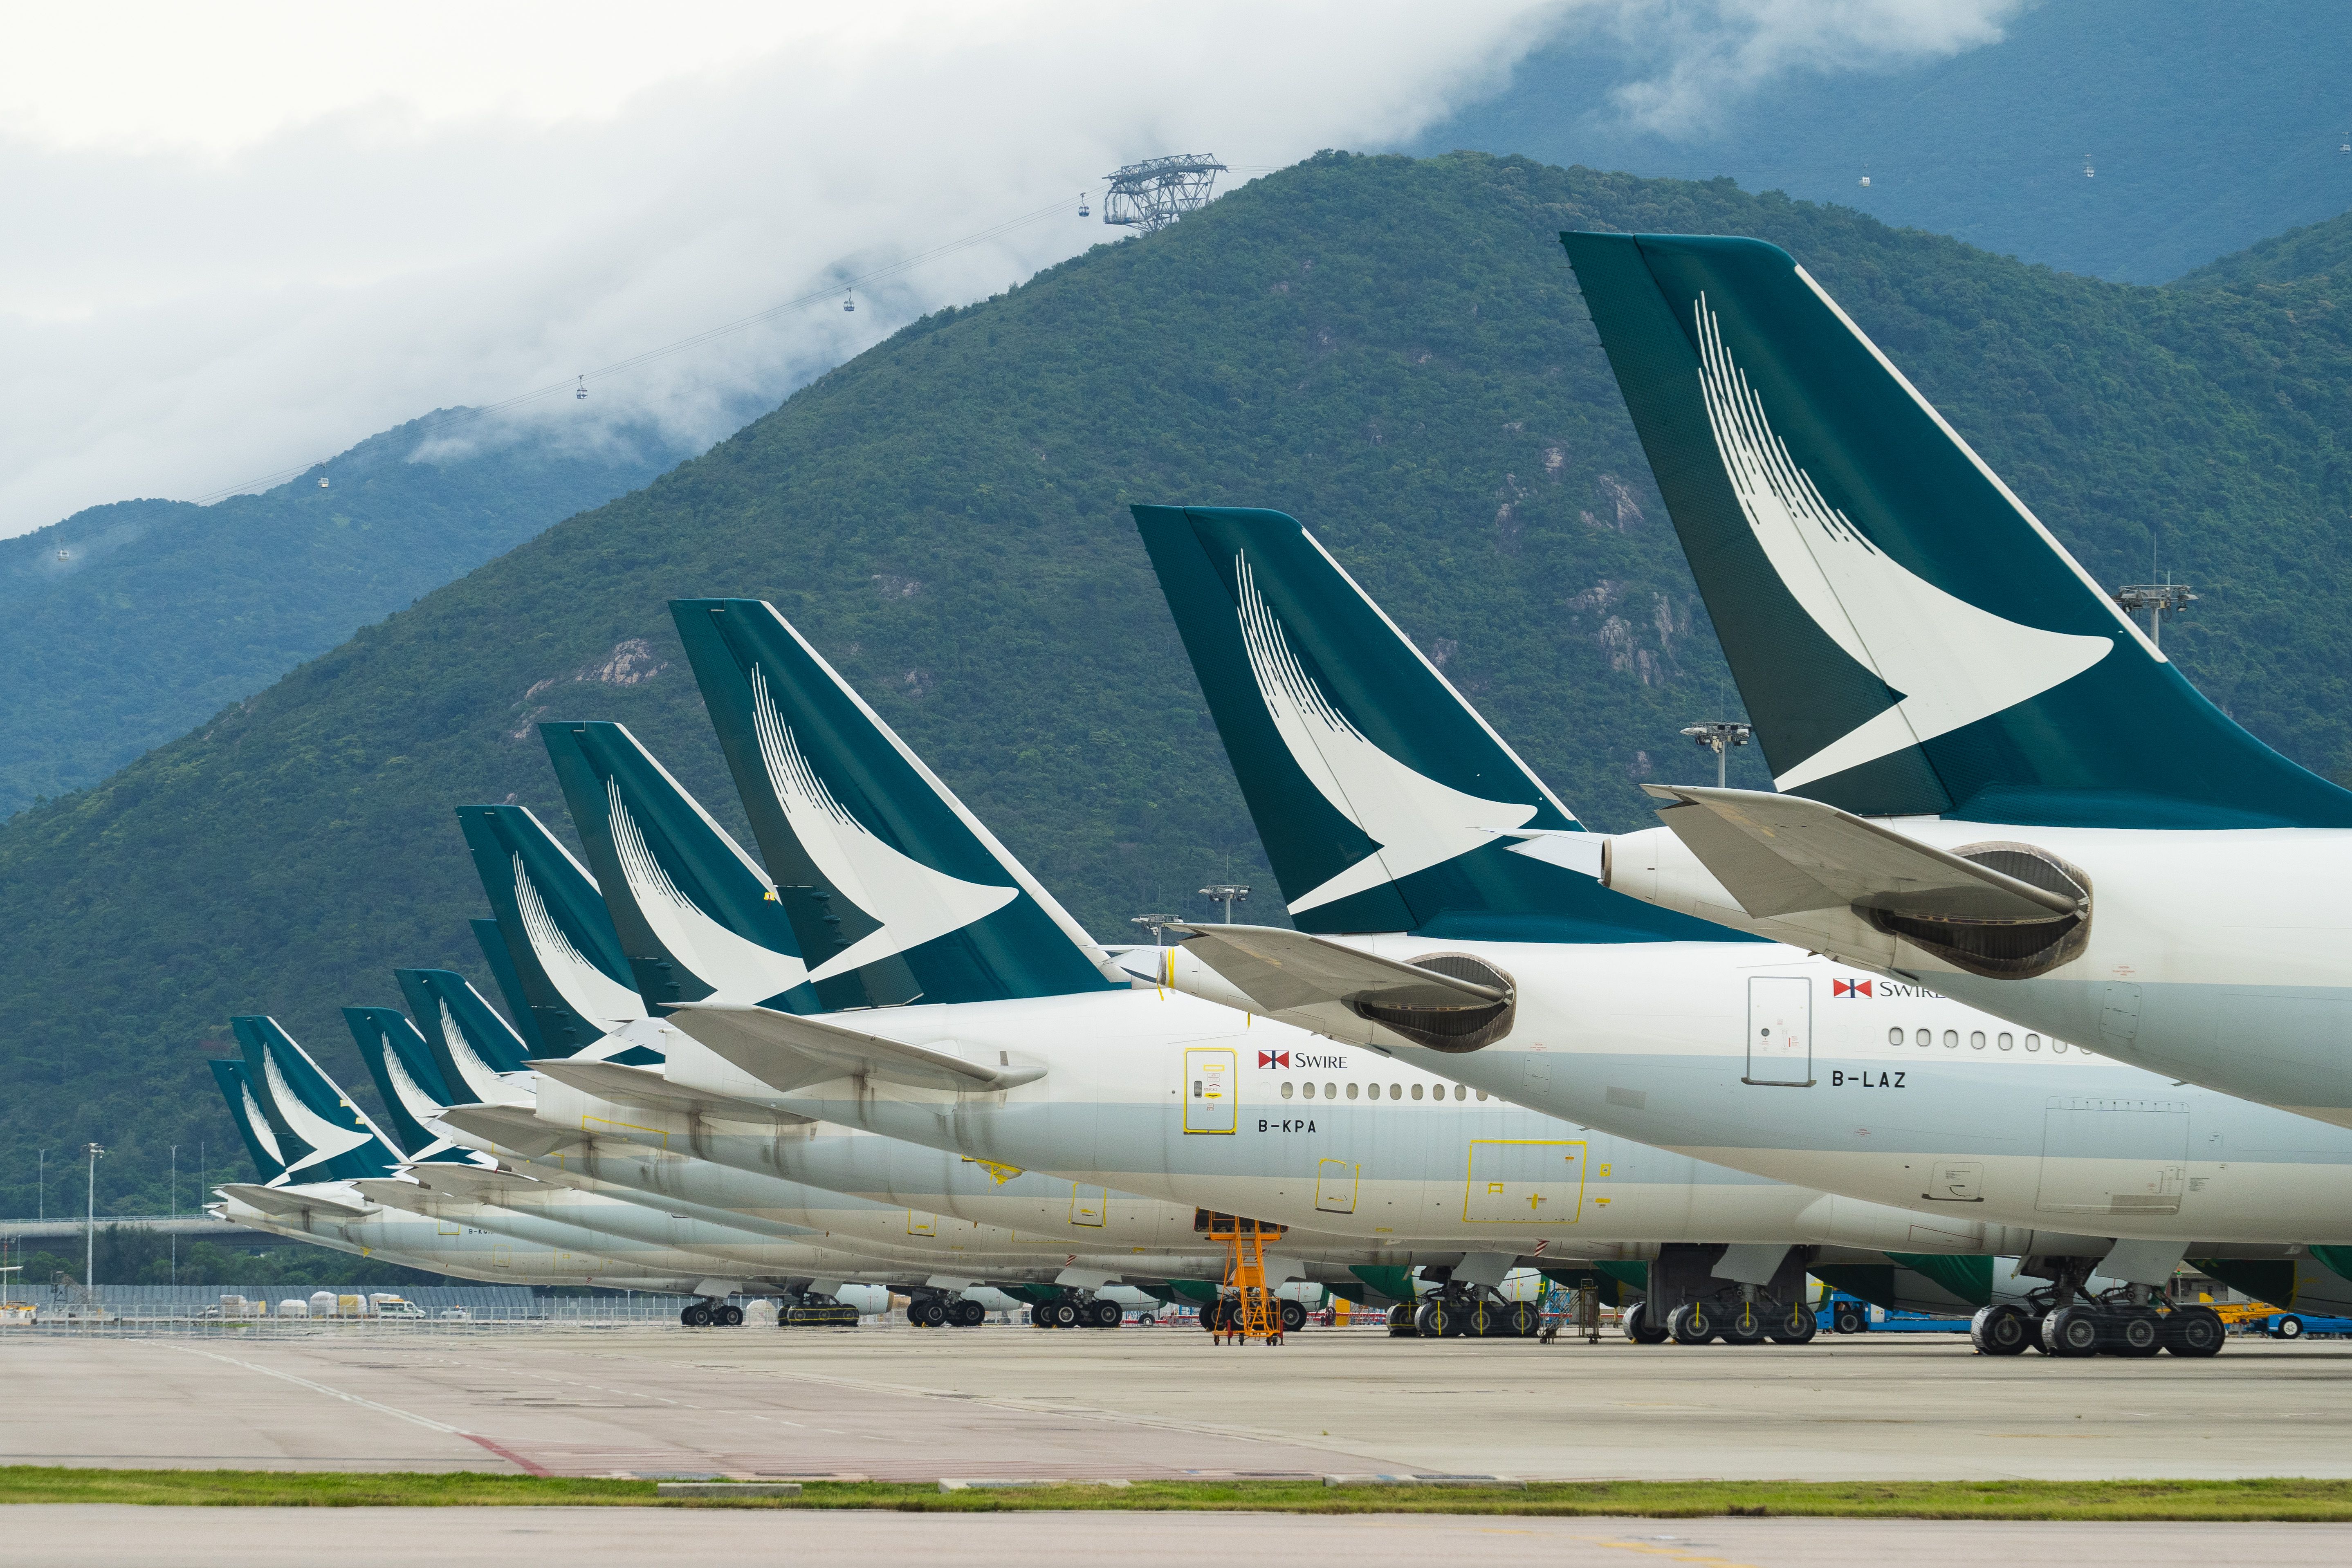 A fleet of Cathay Pacific airplanes parked side by side.